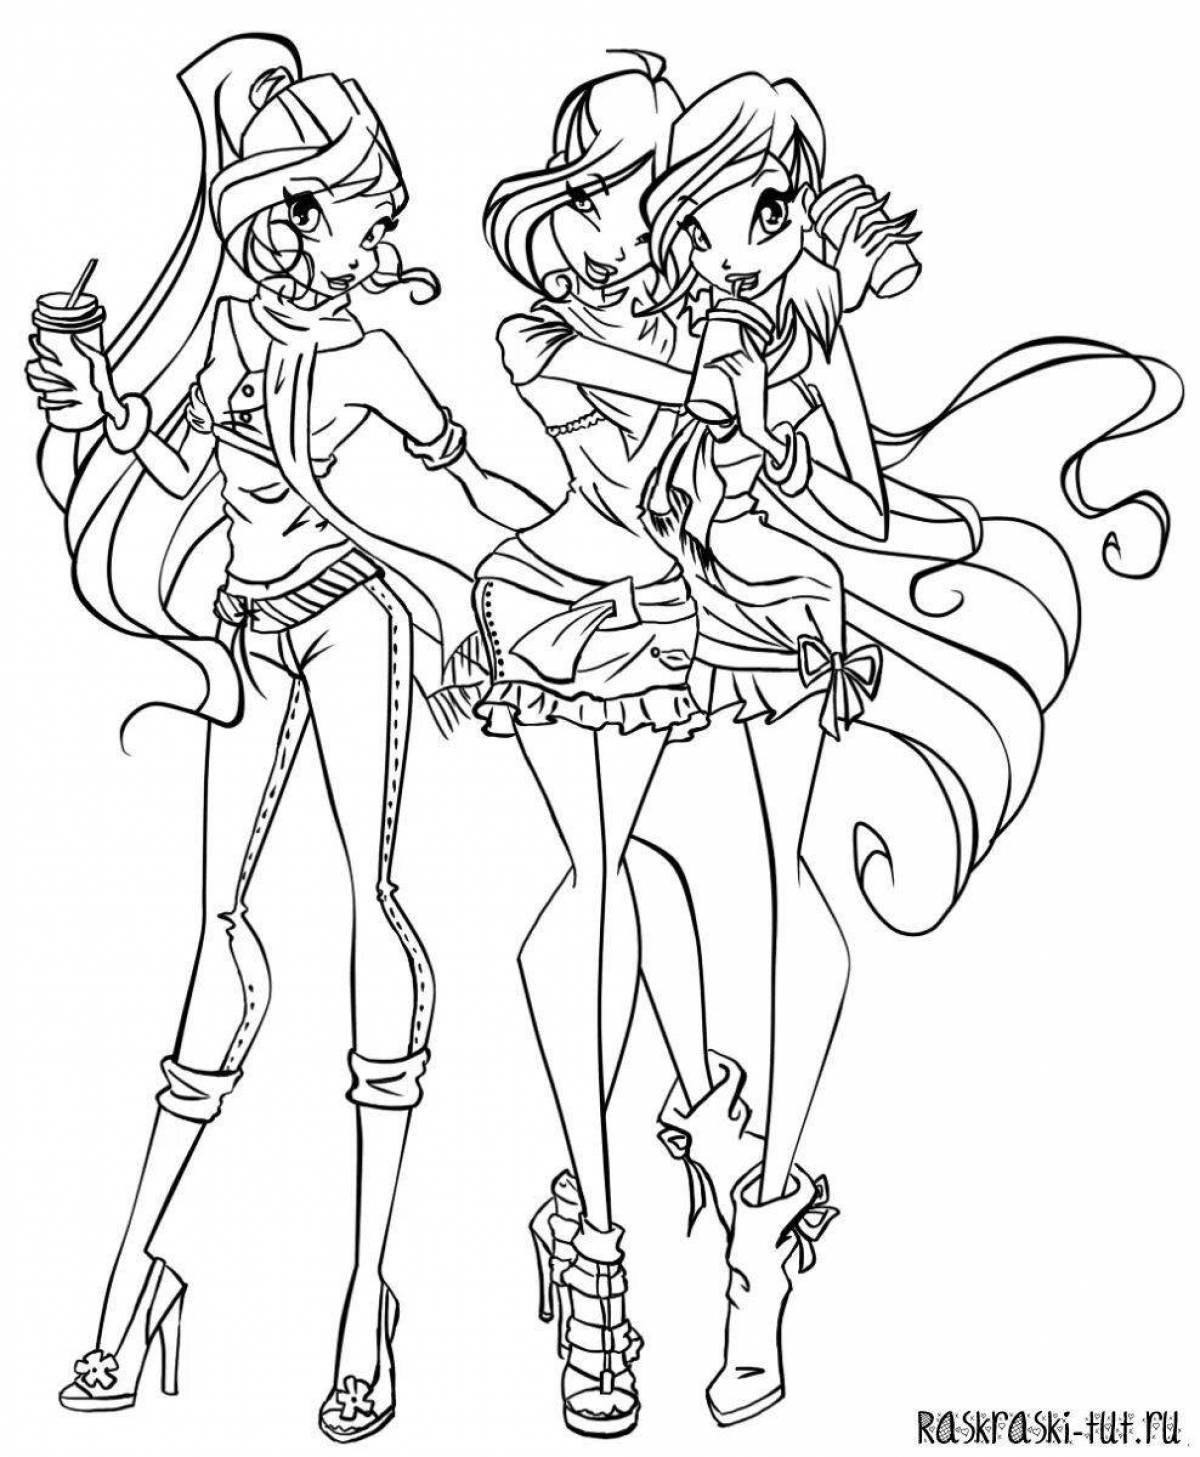 Coloring book playful winx fairies